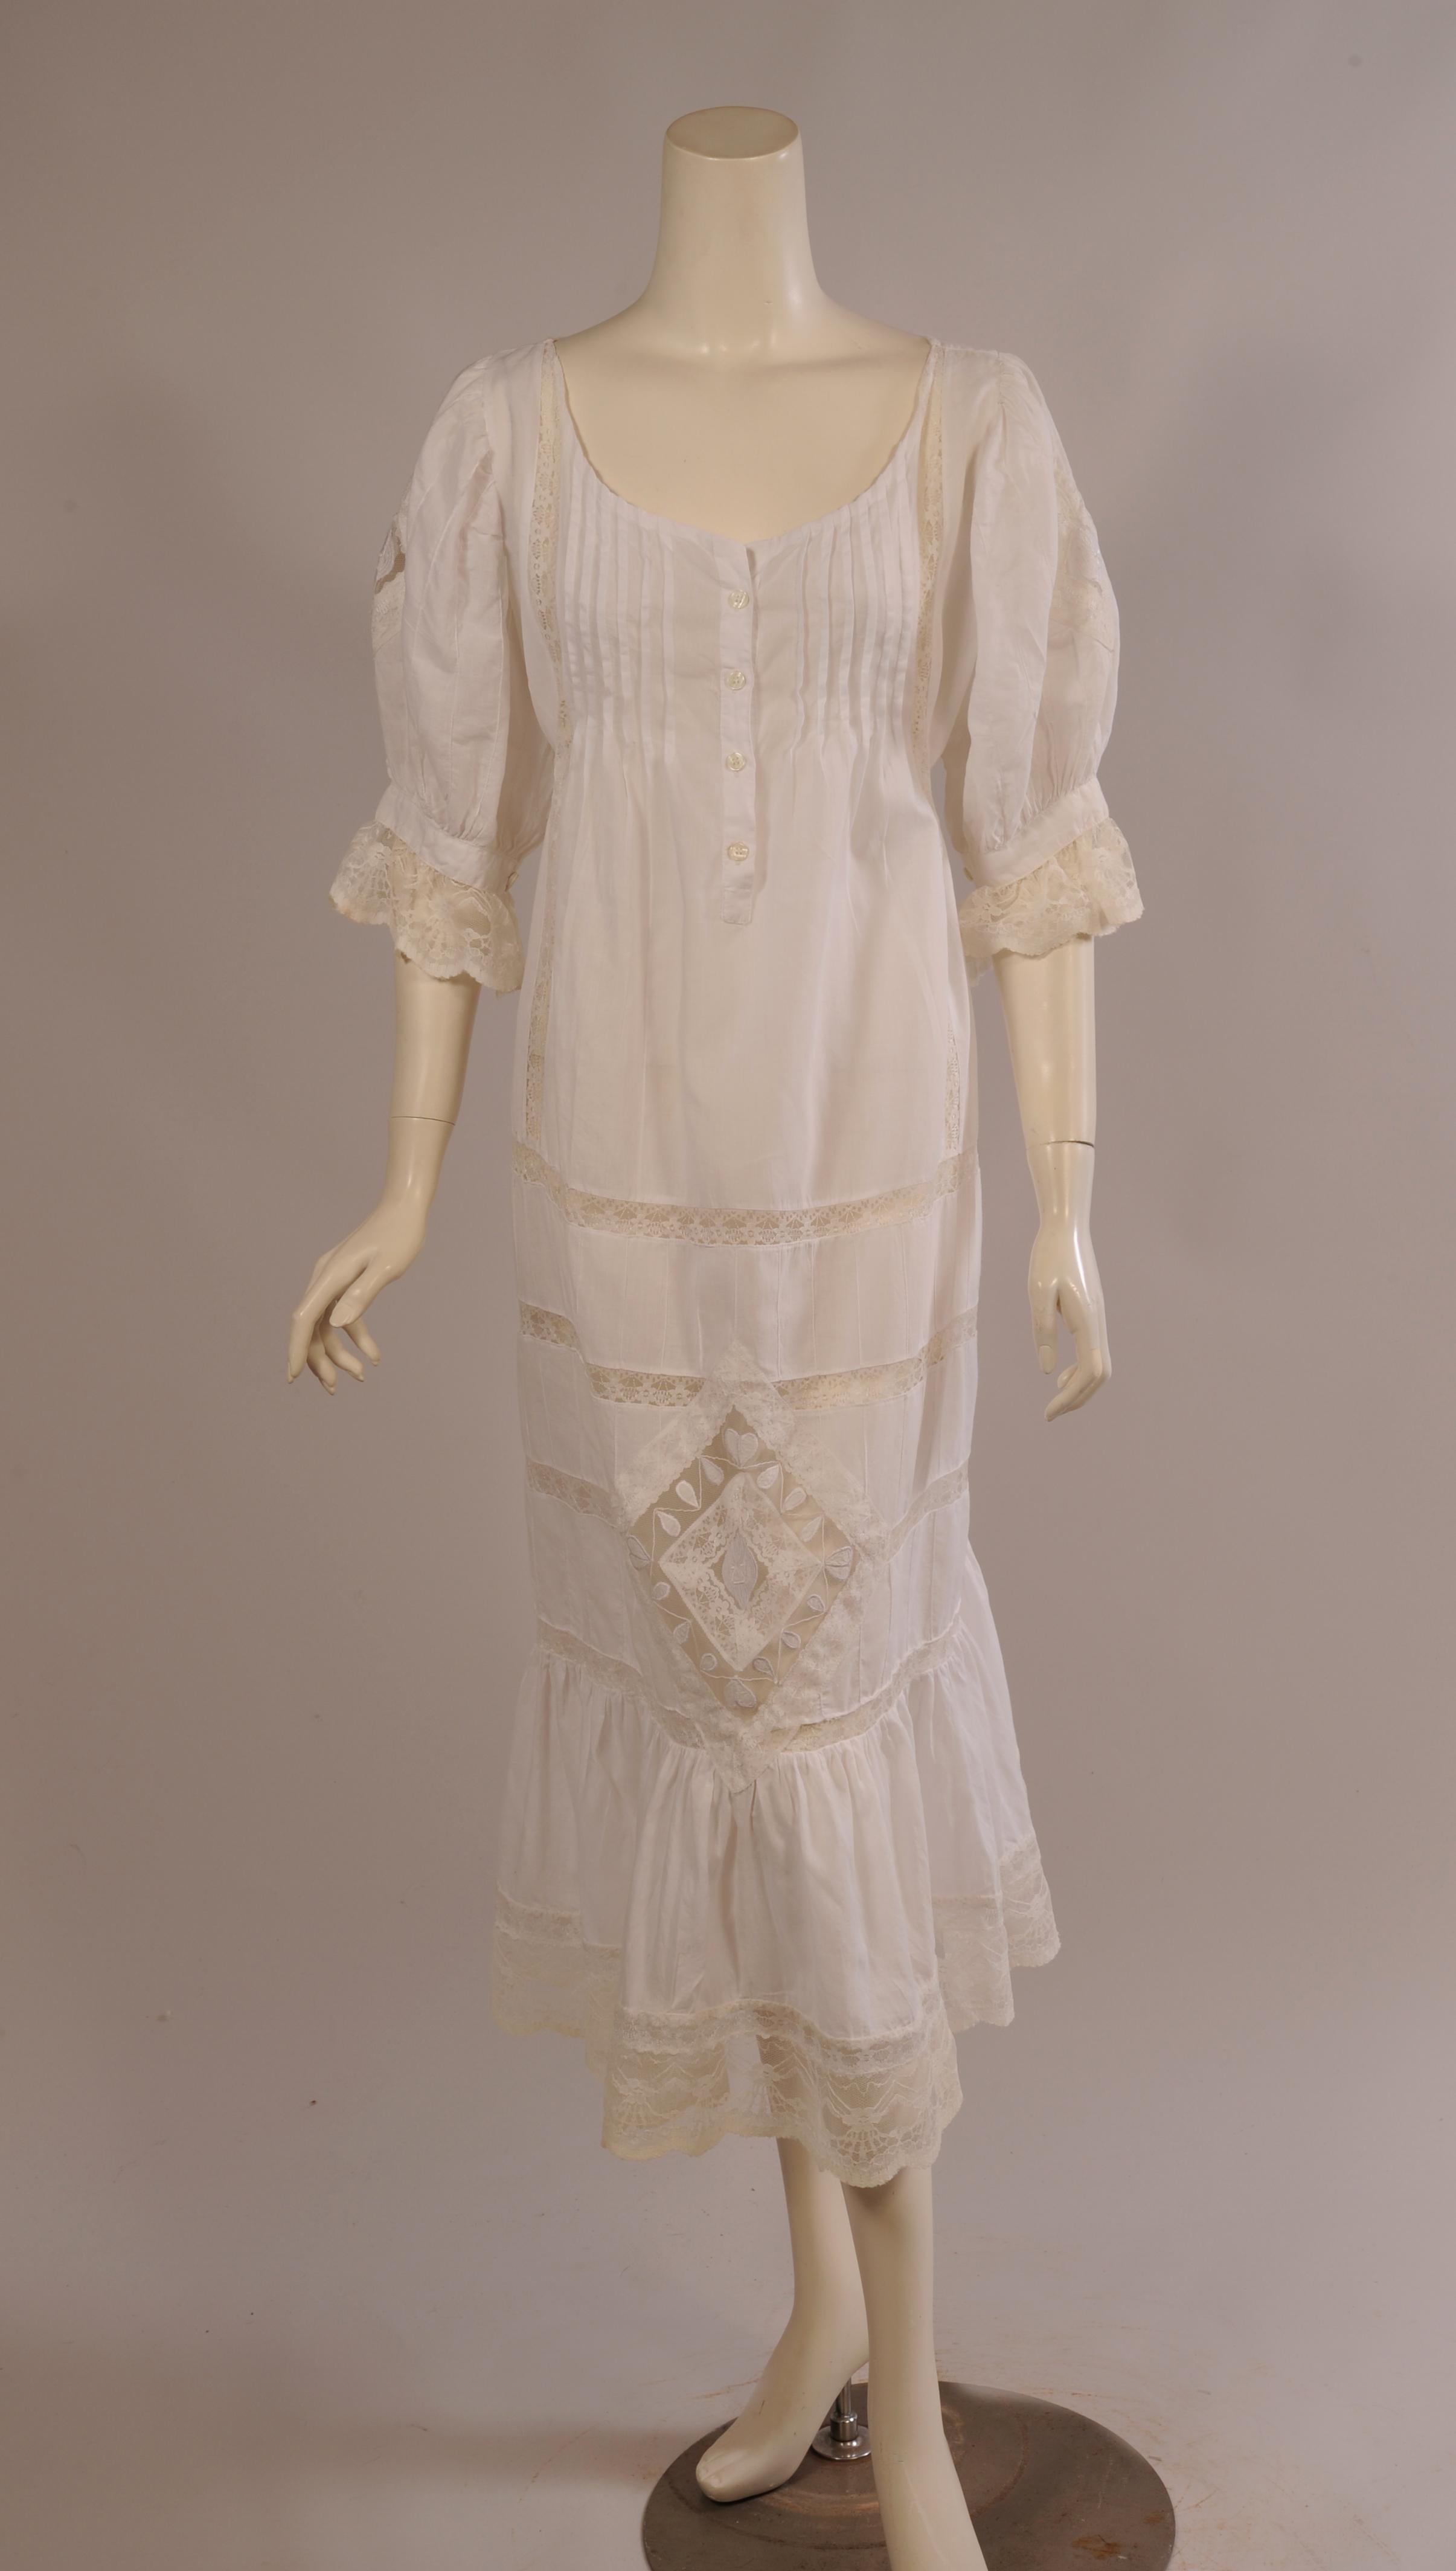 Victorian Inspired White Cotton and Lace Dress circa 1980 For Sale 3